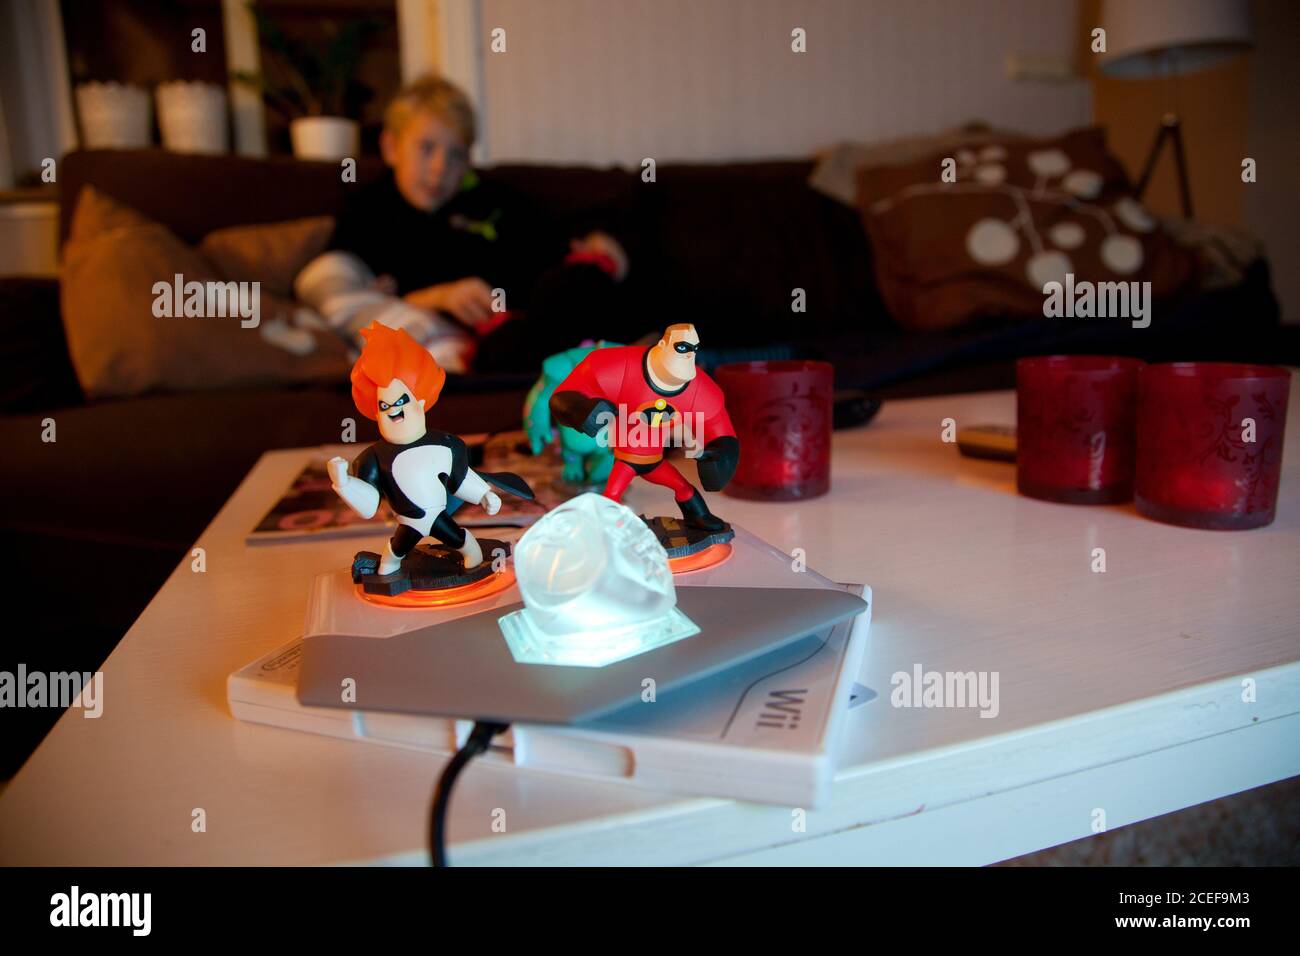 A little guy who plays the video game Disney Infinity for the Nintendo Wii.  Photo Jeppe Gustafsson Stock Photo - Alamy